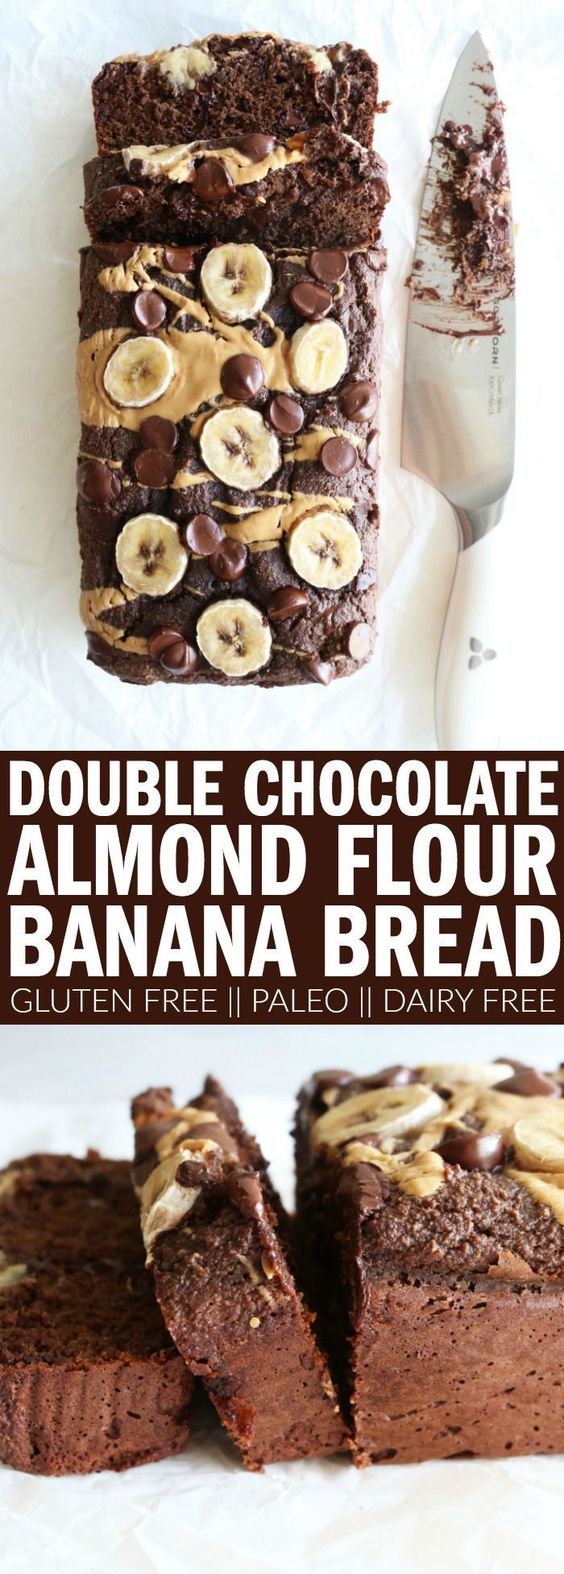 The best double chocolate banana bread recipe you'll ever need! Made with almond flour, it's gluten free, dairy free, and paleo! Grab the milk and enjoy the chocolatey goodness!! thetoastedpinenut.com #glutenfree #paleo #bananabread #dairyfree #chocolate #almondflour